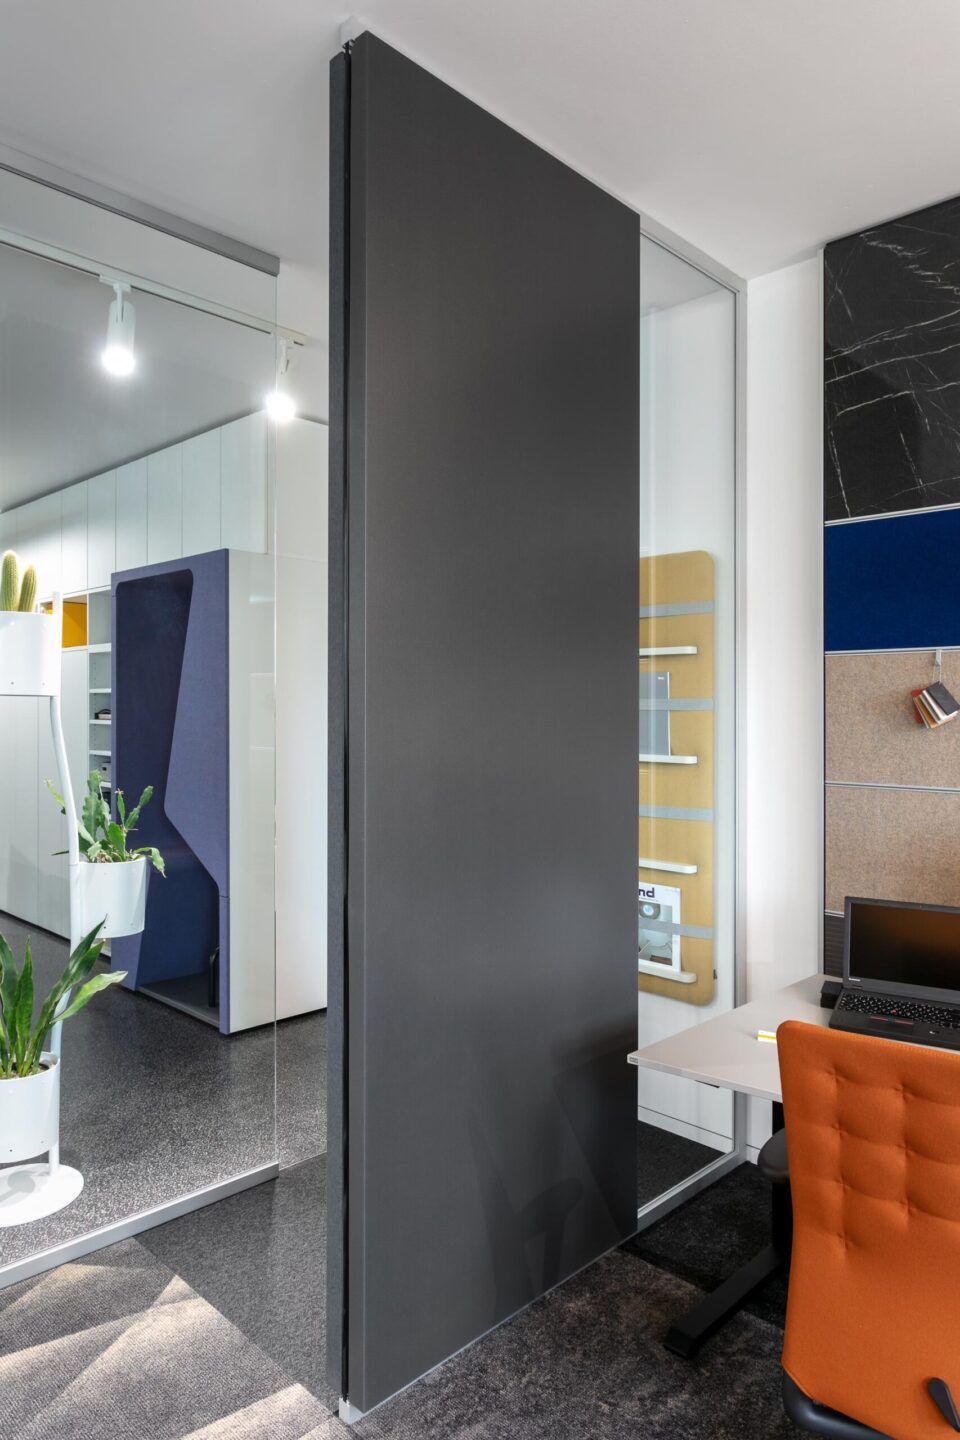 feco partition wall│acoustic│Erlebnisreich at feco-forum